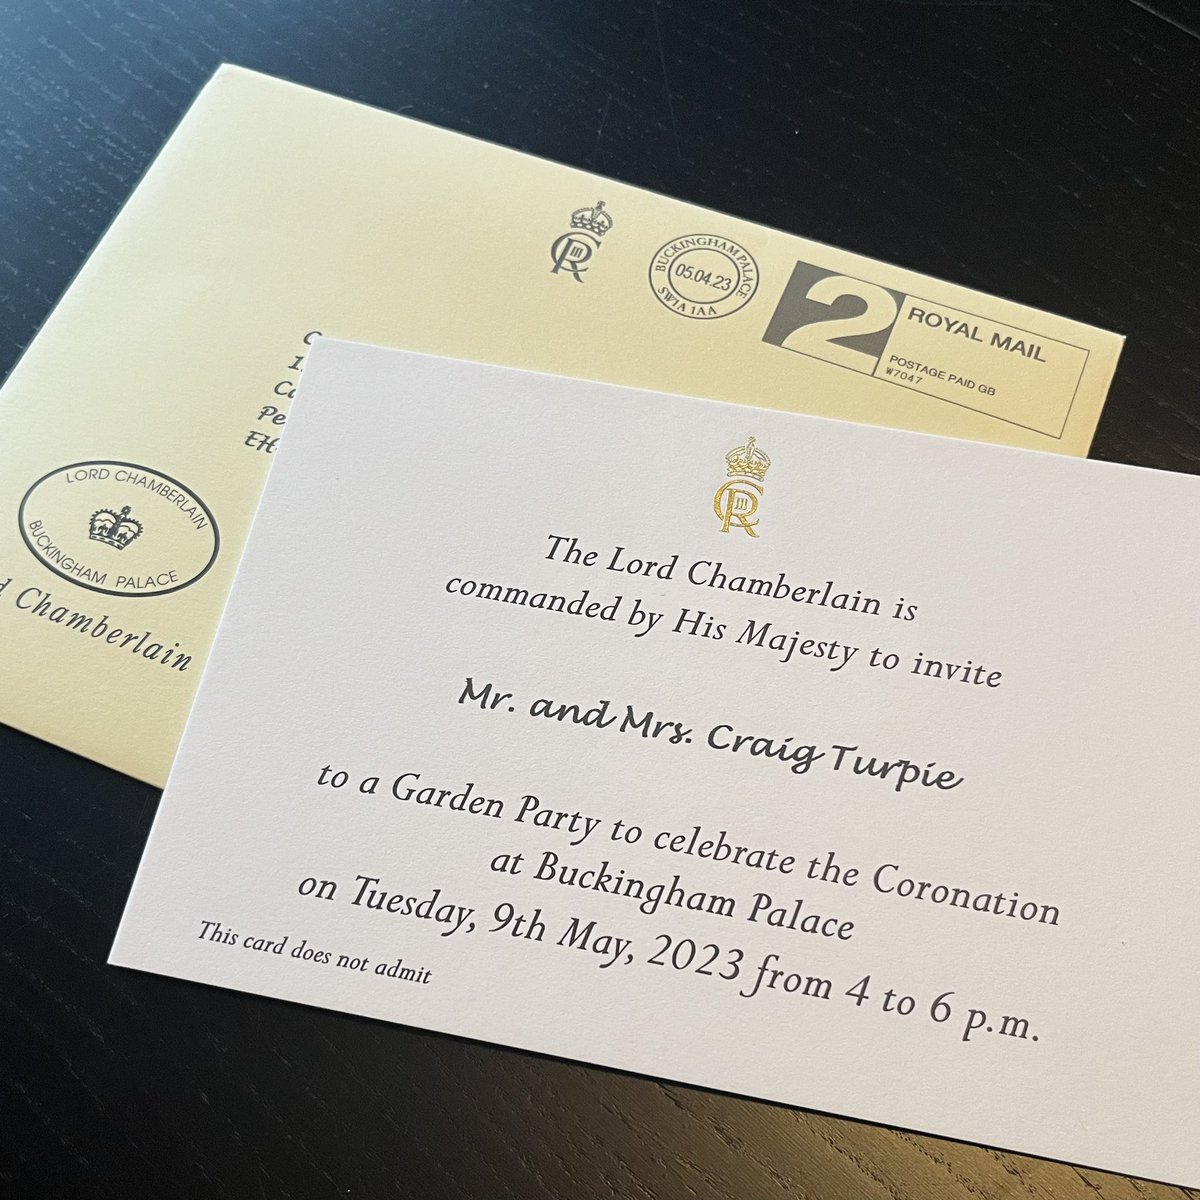 It was a great pleasure to be invited to Buckingham Palace for the Garden Party to celebrate the #Coronation, representing @scouts, and to be presented to @KensingtonRoyal. A memorable day. ⚜️👑